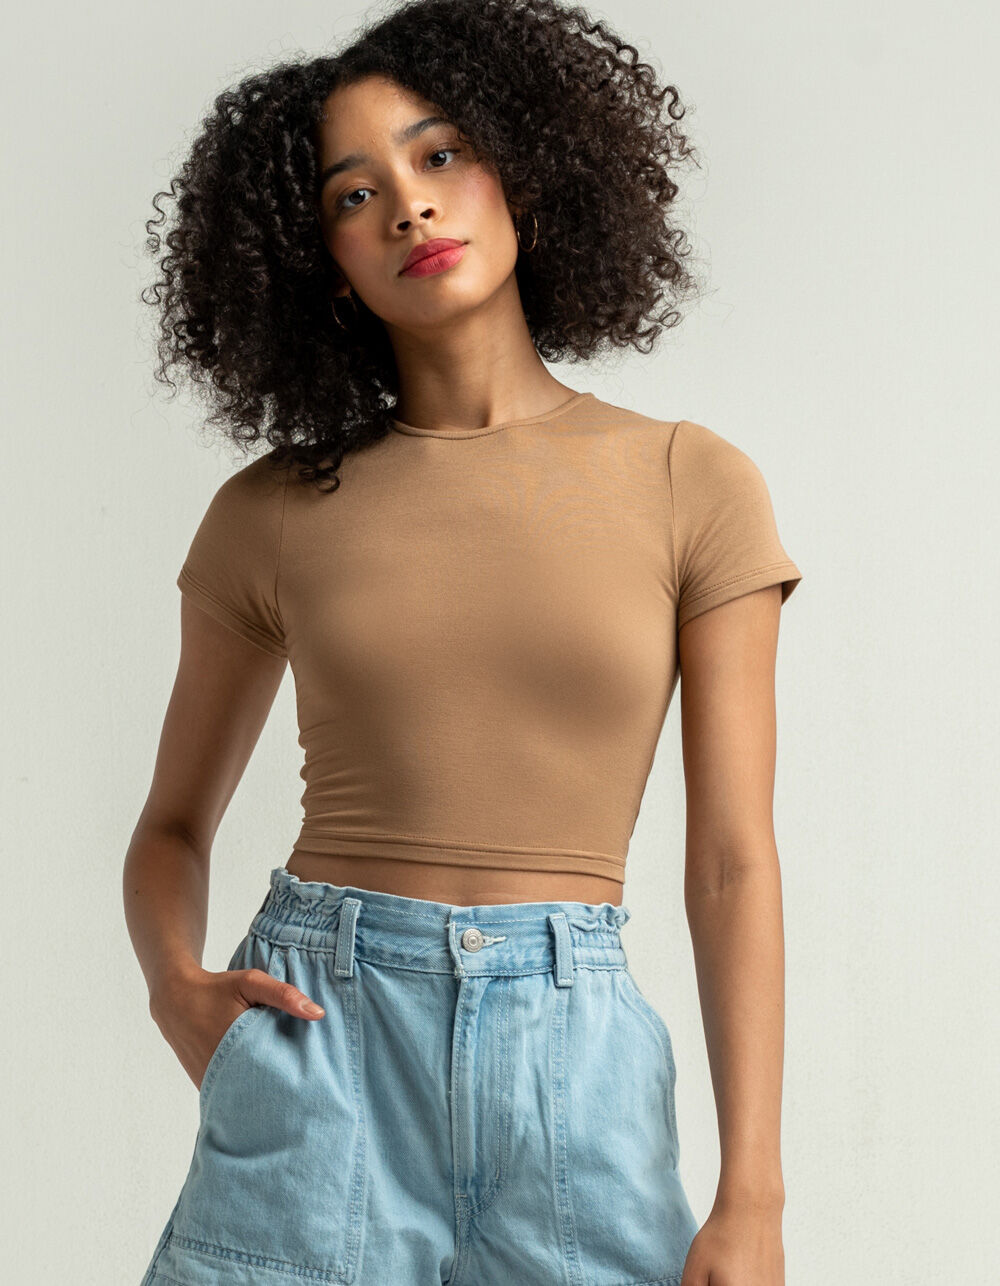 WEST OF MELROSE Back To Back Womens Tan Top - TAN | Tillys